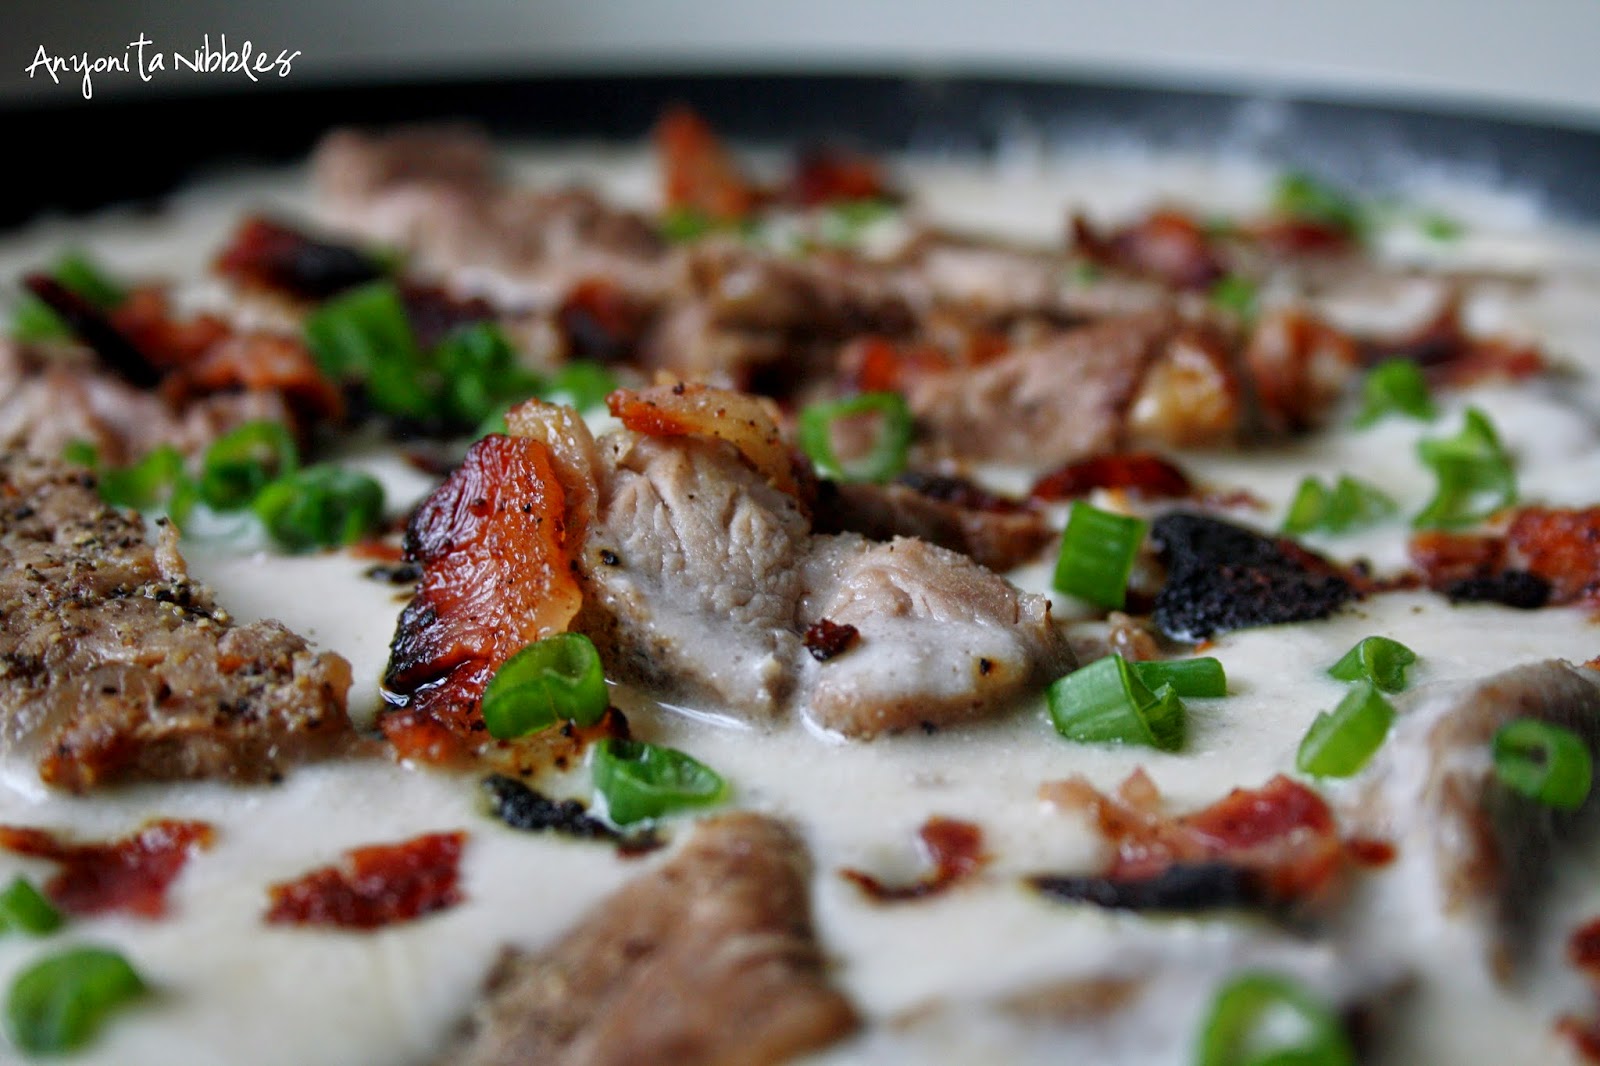 This skillet soup is made with pork cooked two ways, crispy bacon and loads of cream of mushroom soup.